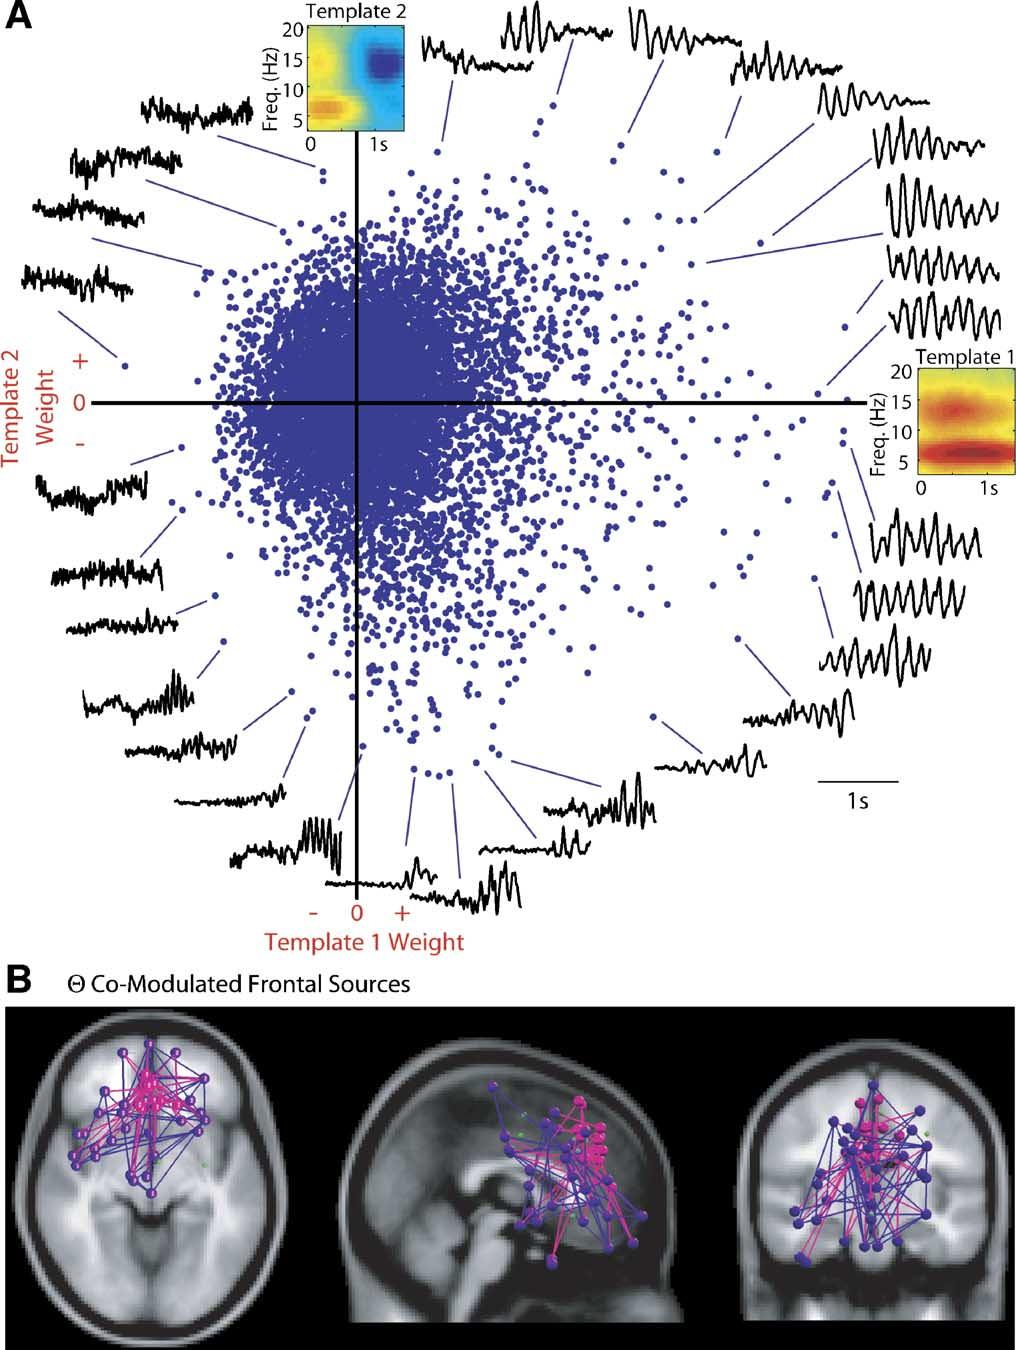 350 J. Onton et al. / NeuroImage 27 (2005) 341 356 Fig. 5. (A) Scatter plot showing single Memorize-letter trial weights (dots) for ERSP templates 1 and 2. The (1.